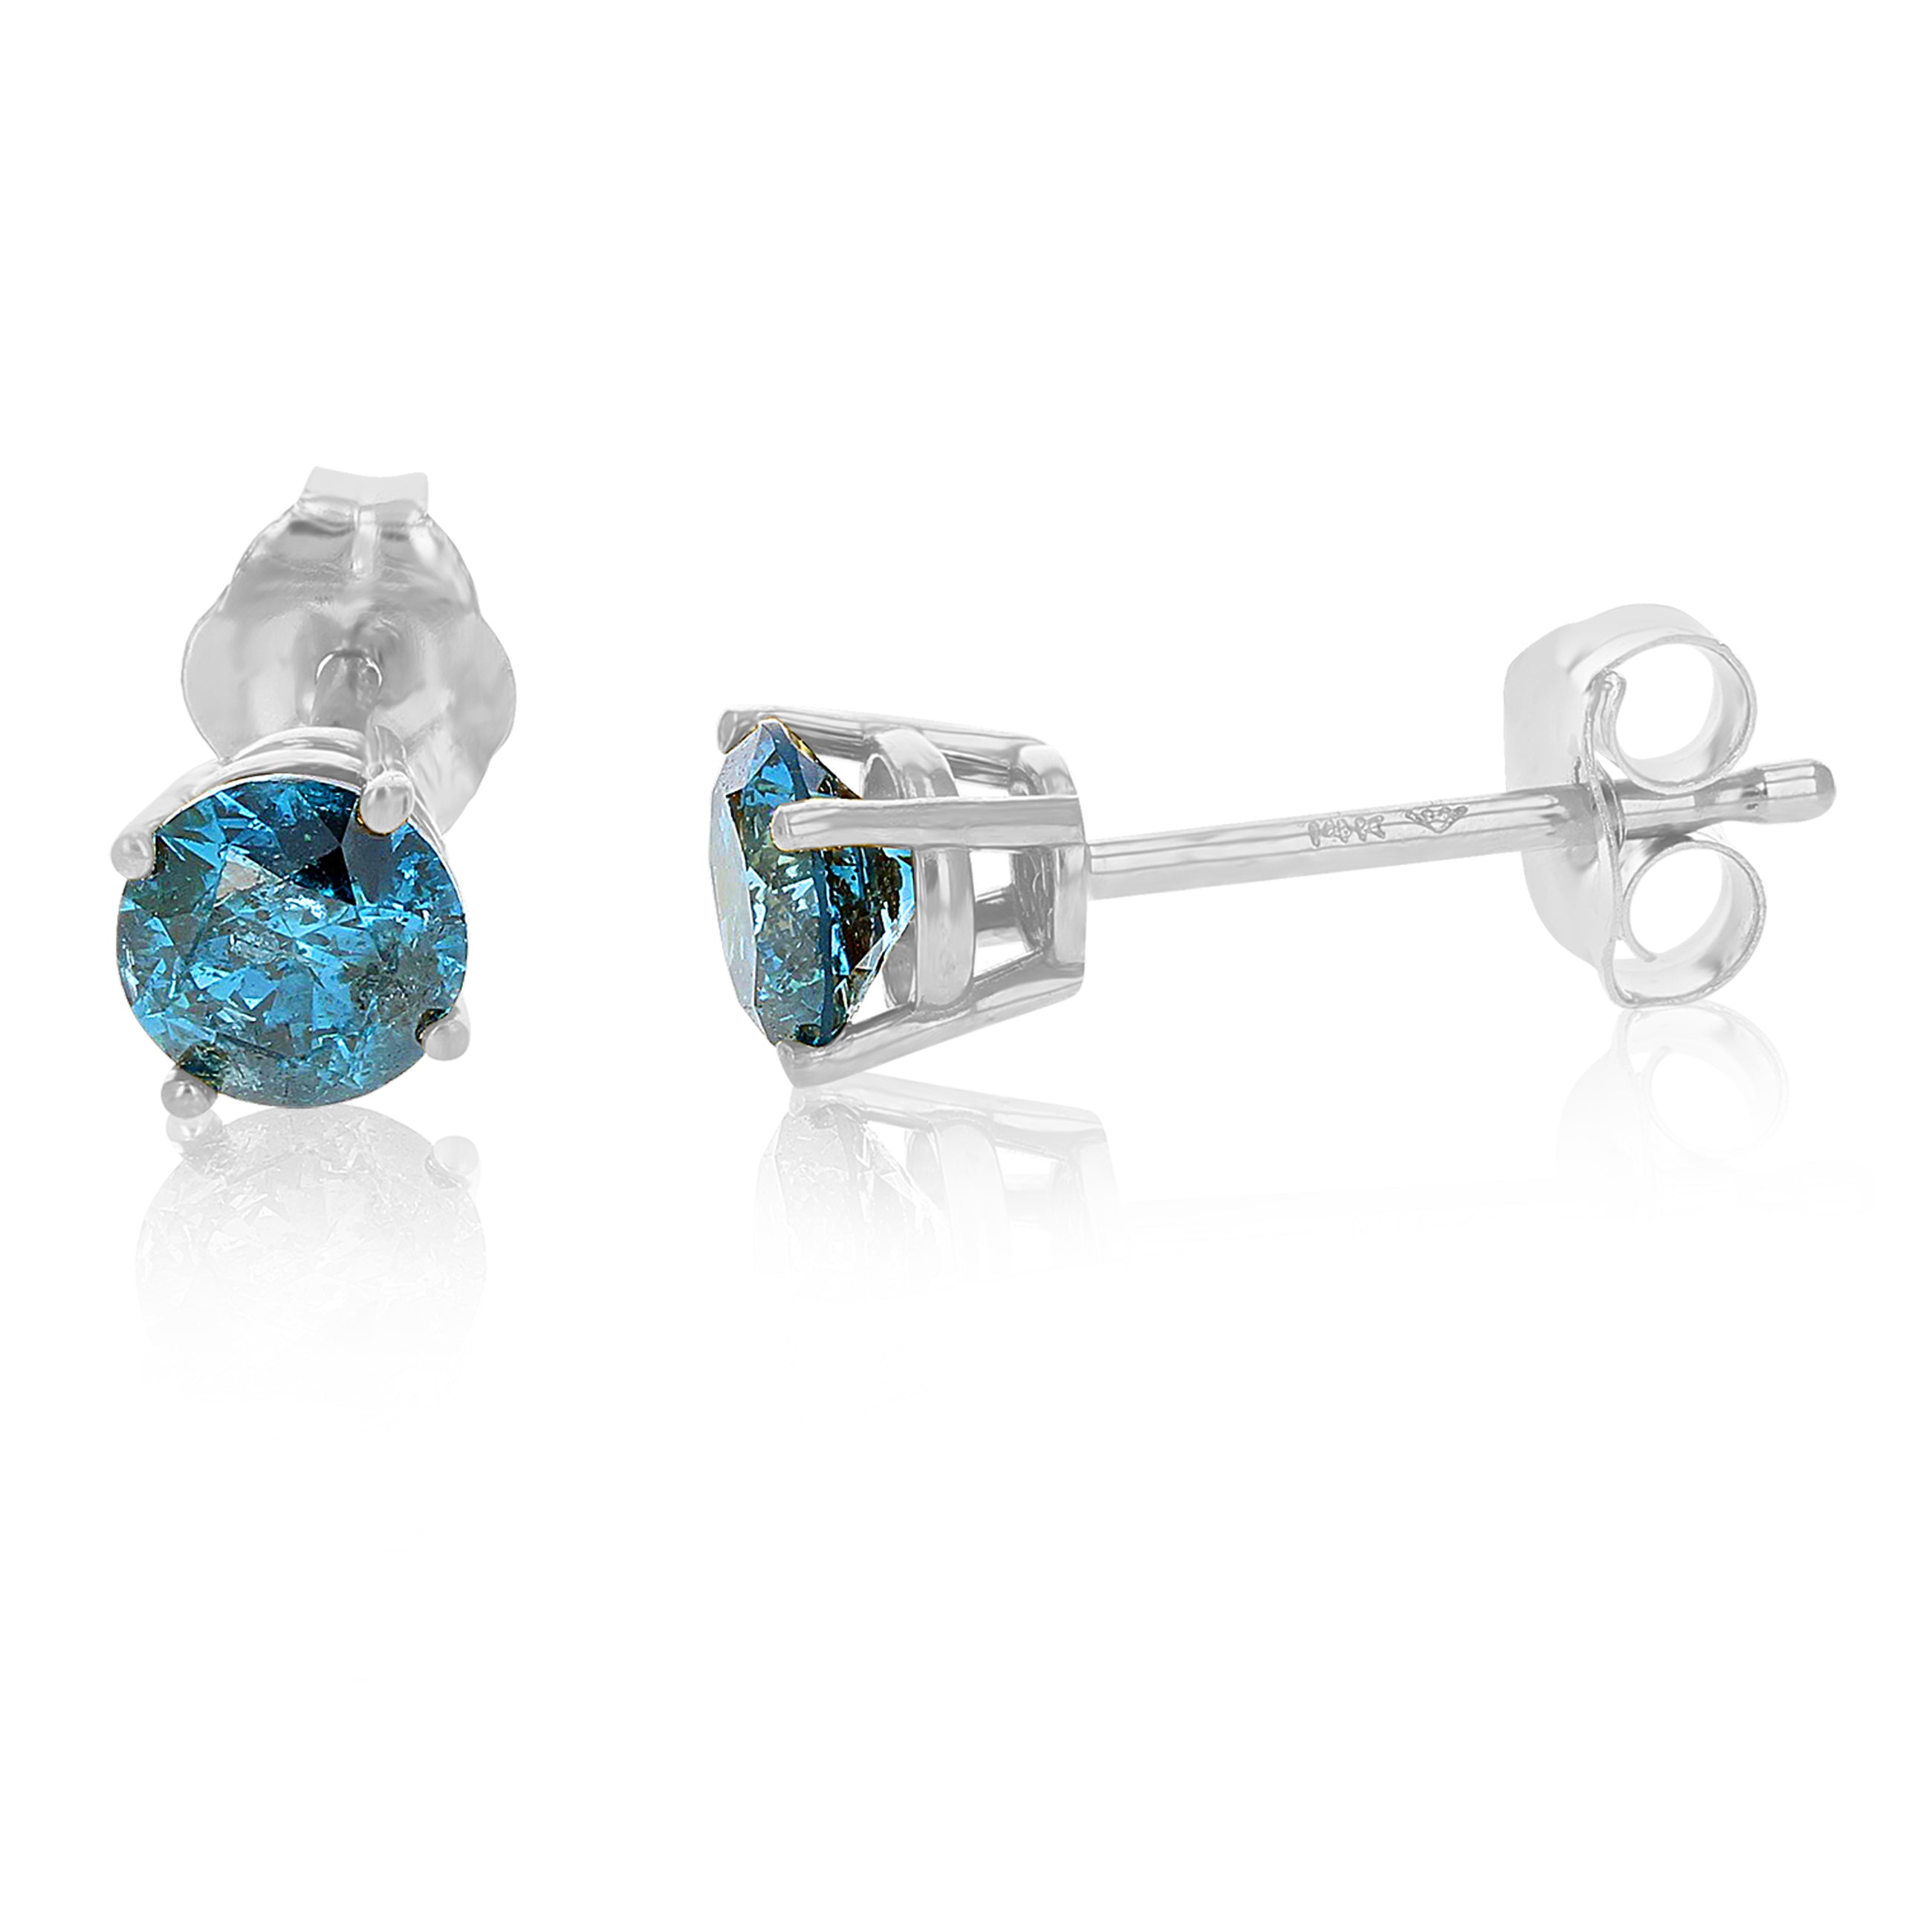 Vir Jewels 3/8 cttw Blue Diamond Stud Earrings 14k White or Yellow Gold Round Shape with Push Backs female